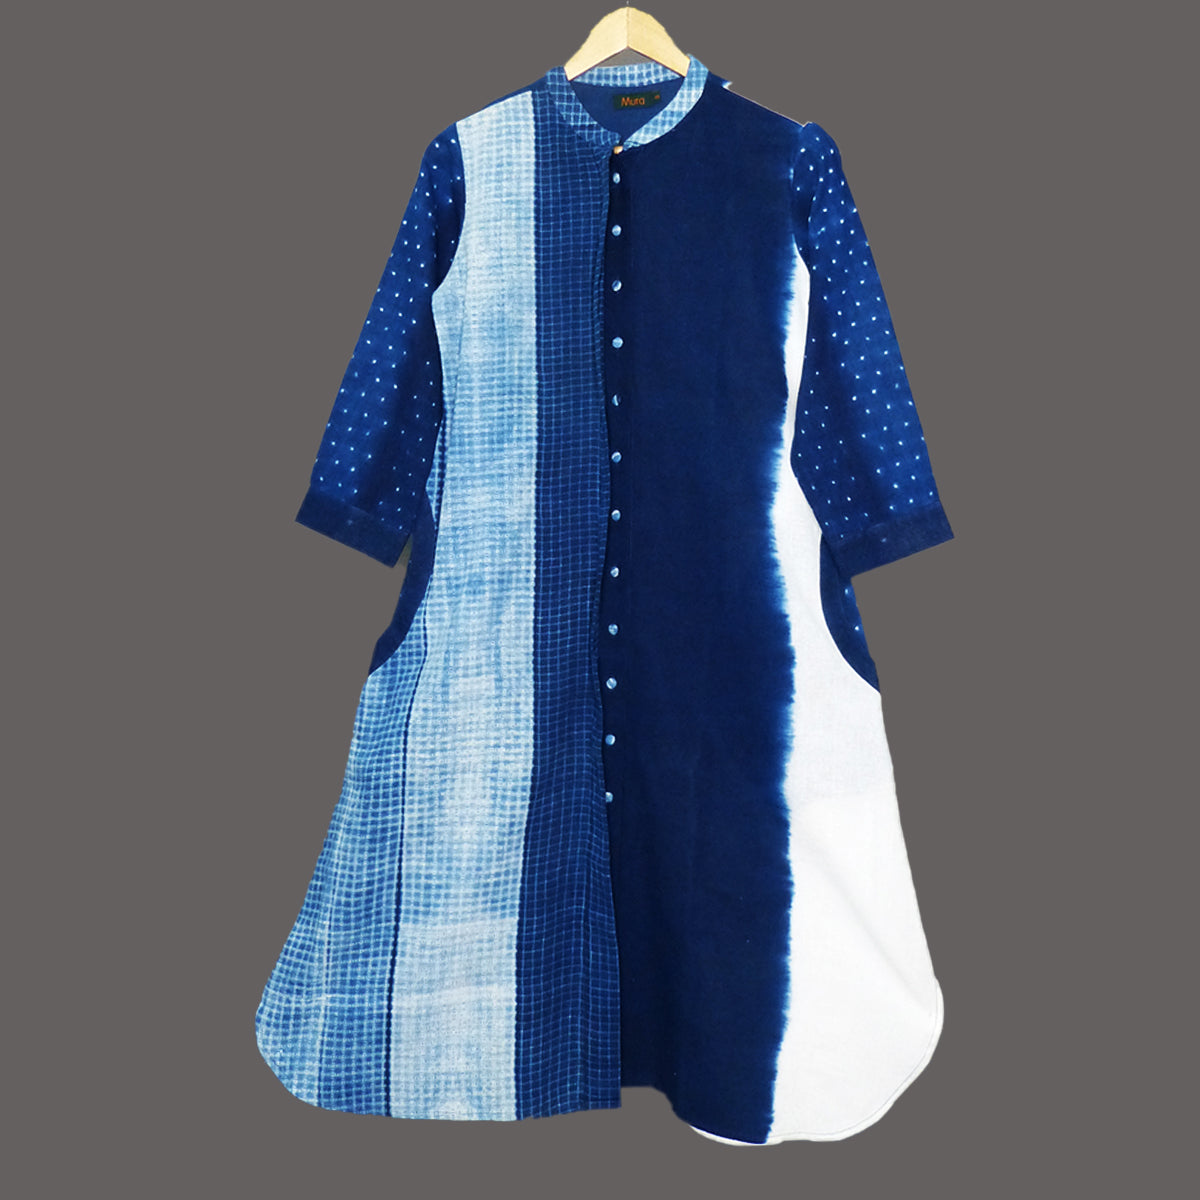 Smart indigo Shirt dress with an interplay of shibori textures and plain dyed & undyed spaces - 1